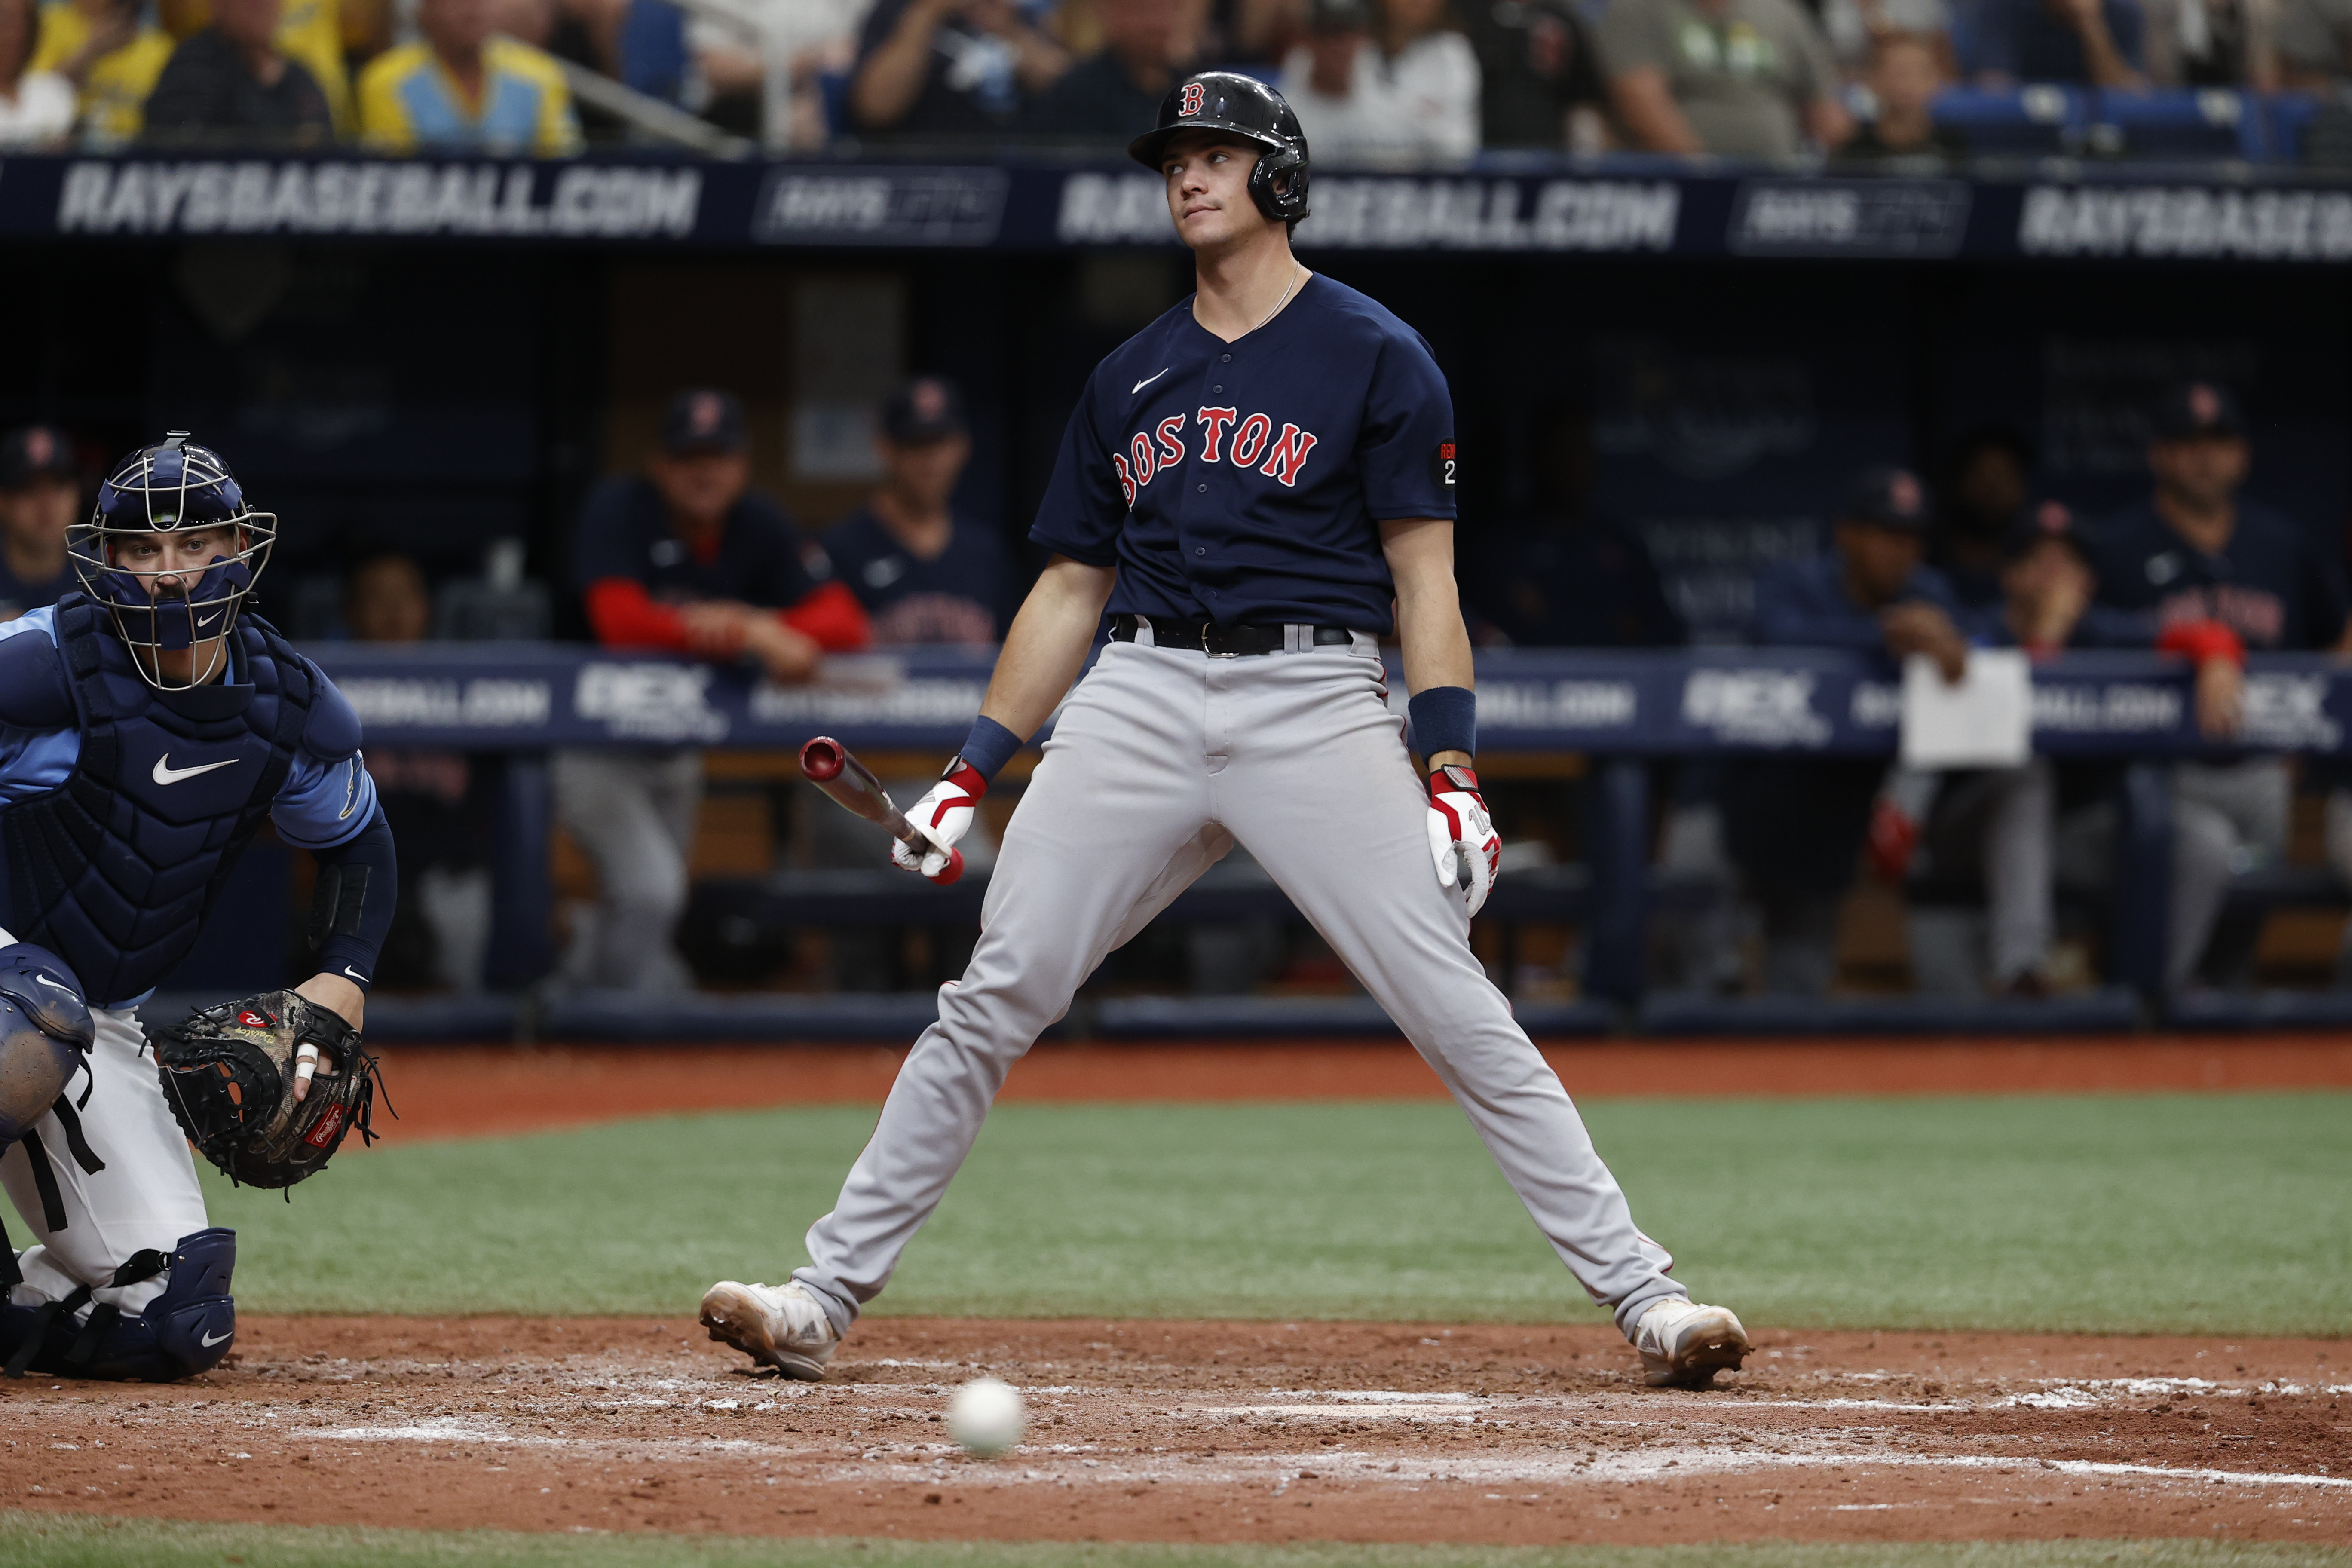 søsyge Markeret Lav en seng Back-to-back painful losses to Rays show Red Sox in serious need of a  kick-start - The Boston Globe